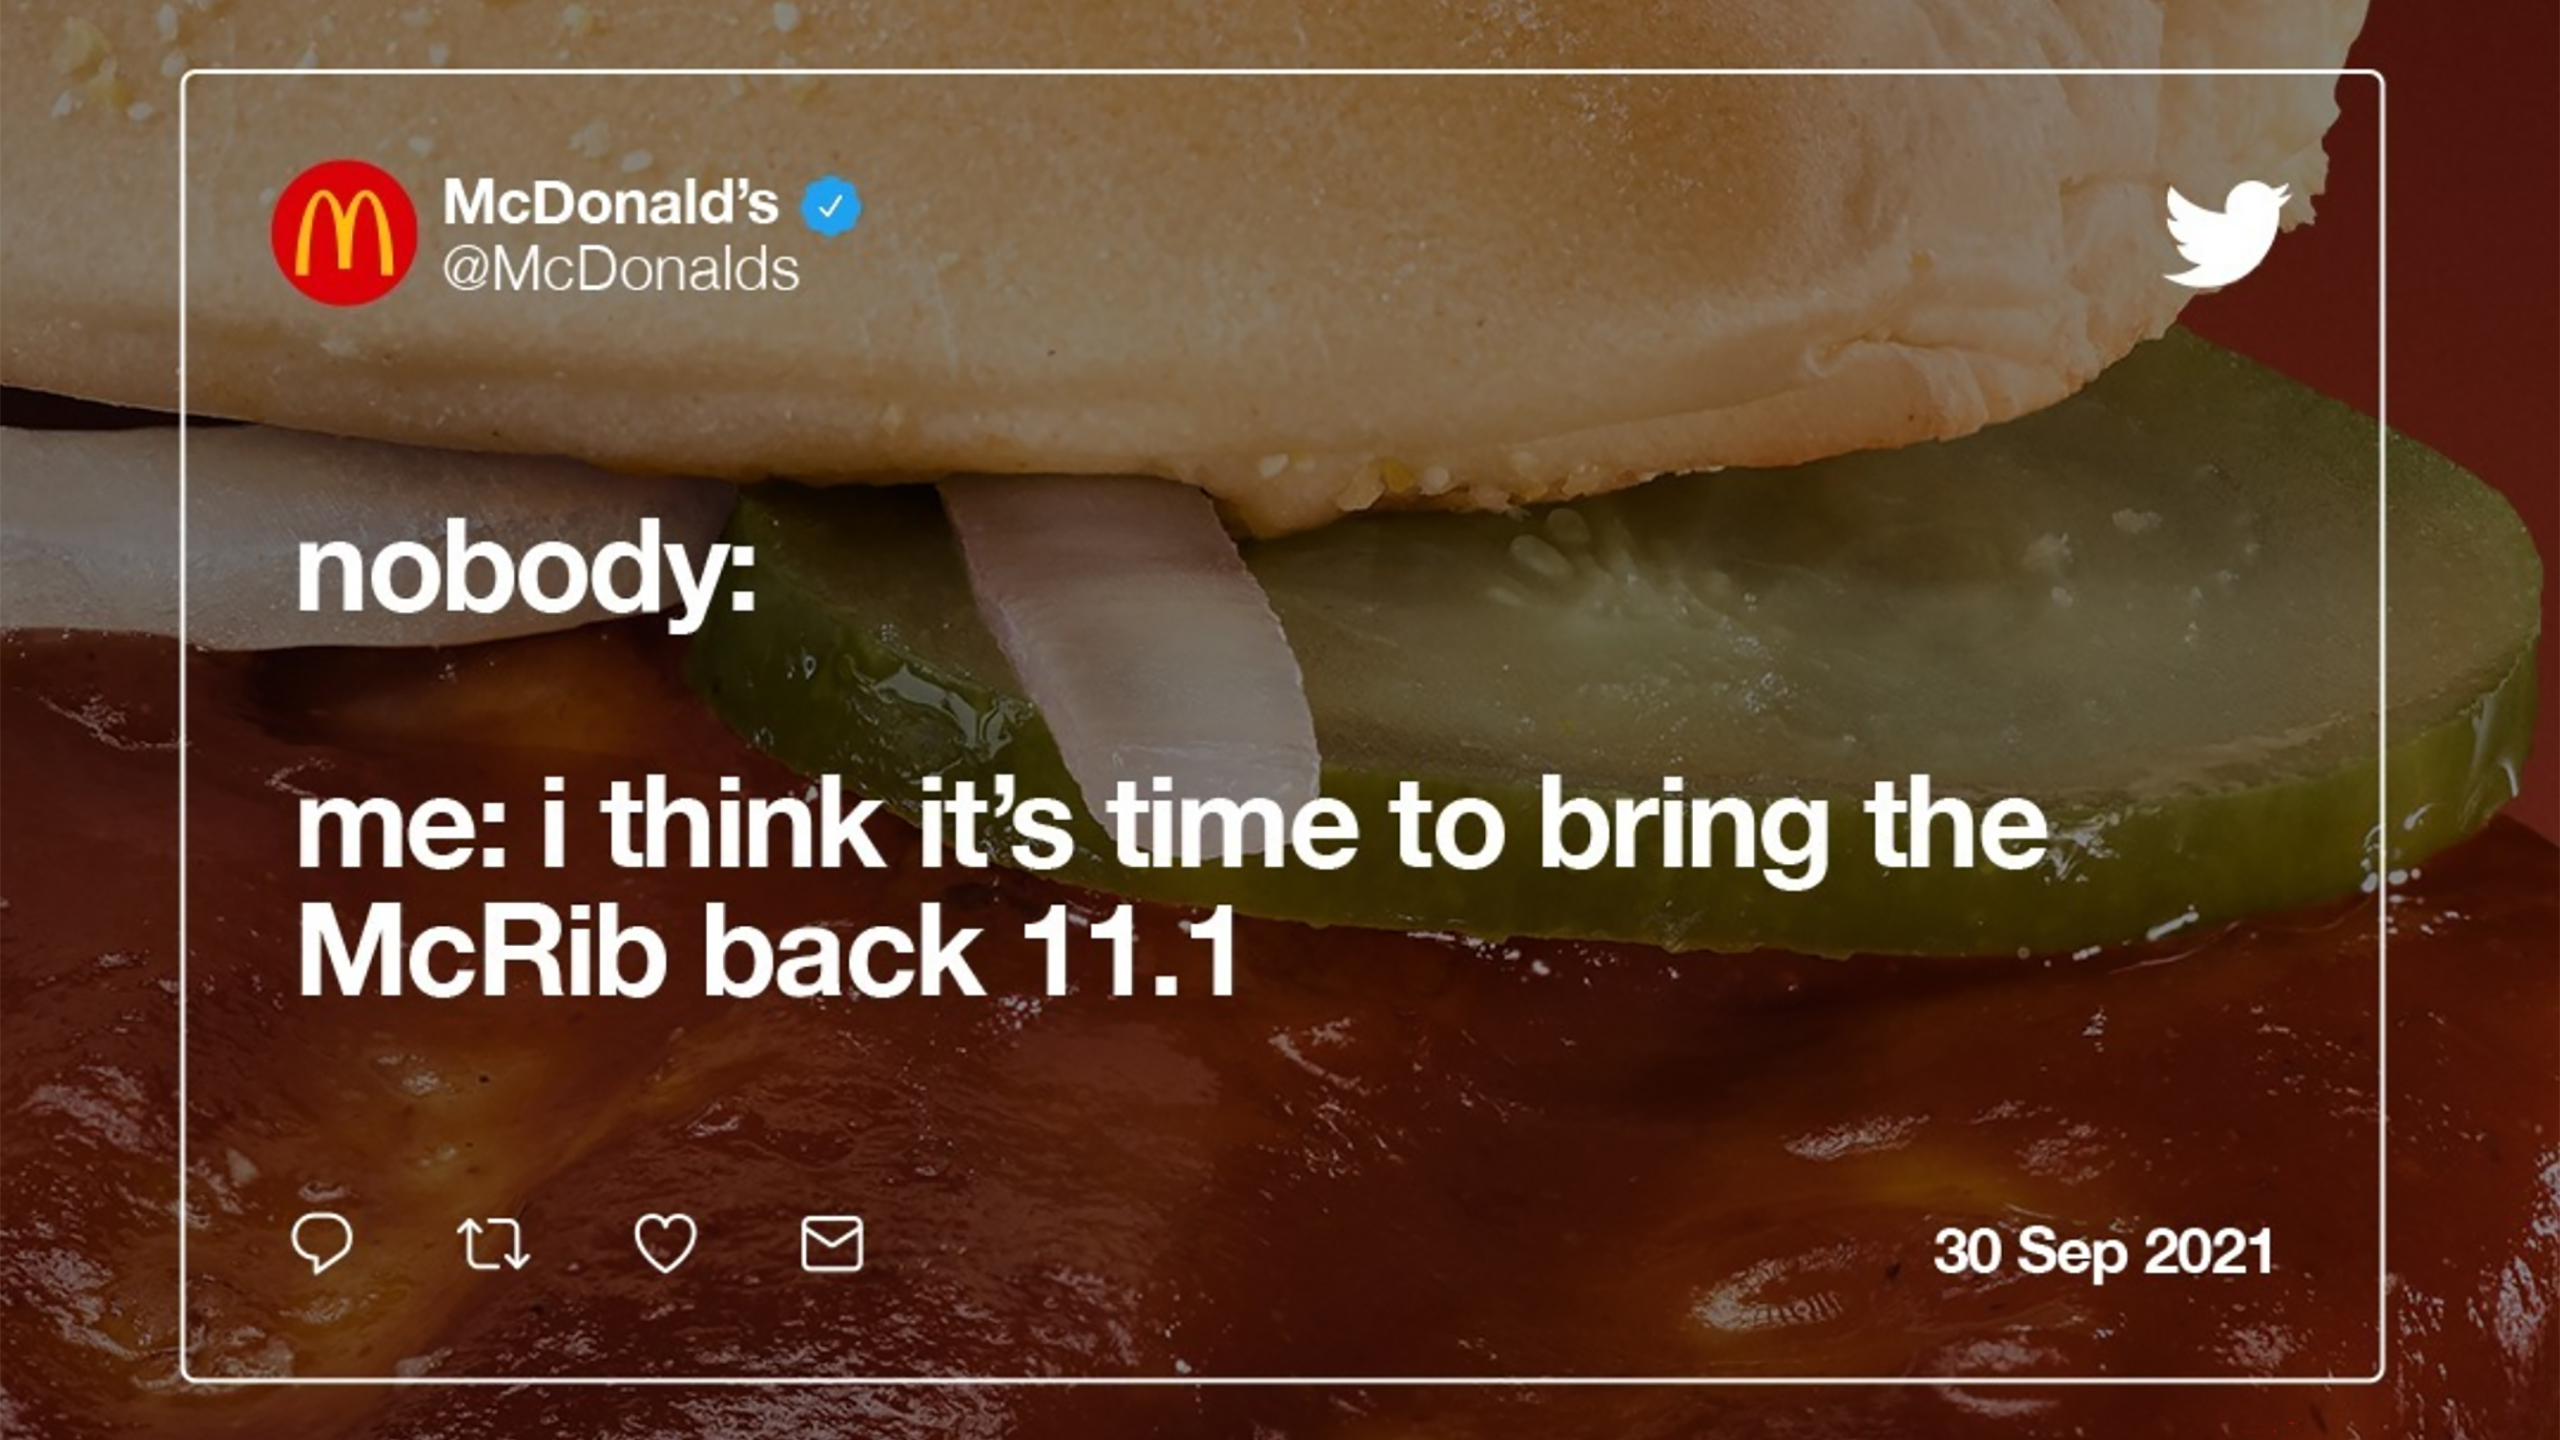 The mcrib is back